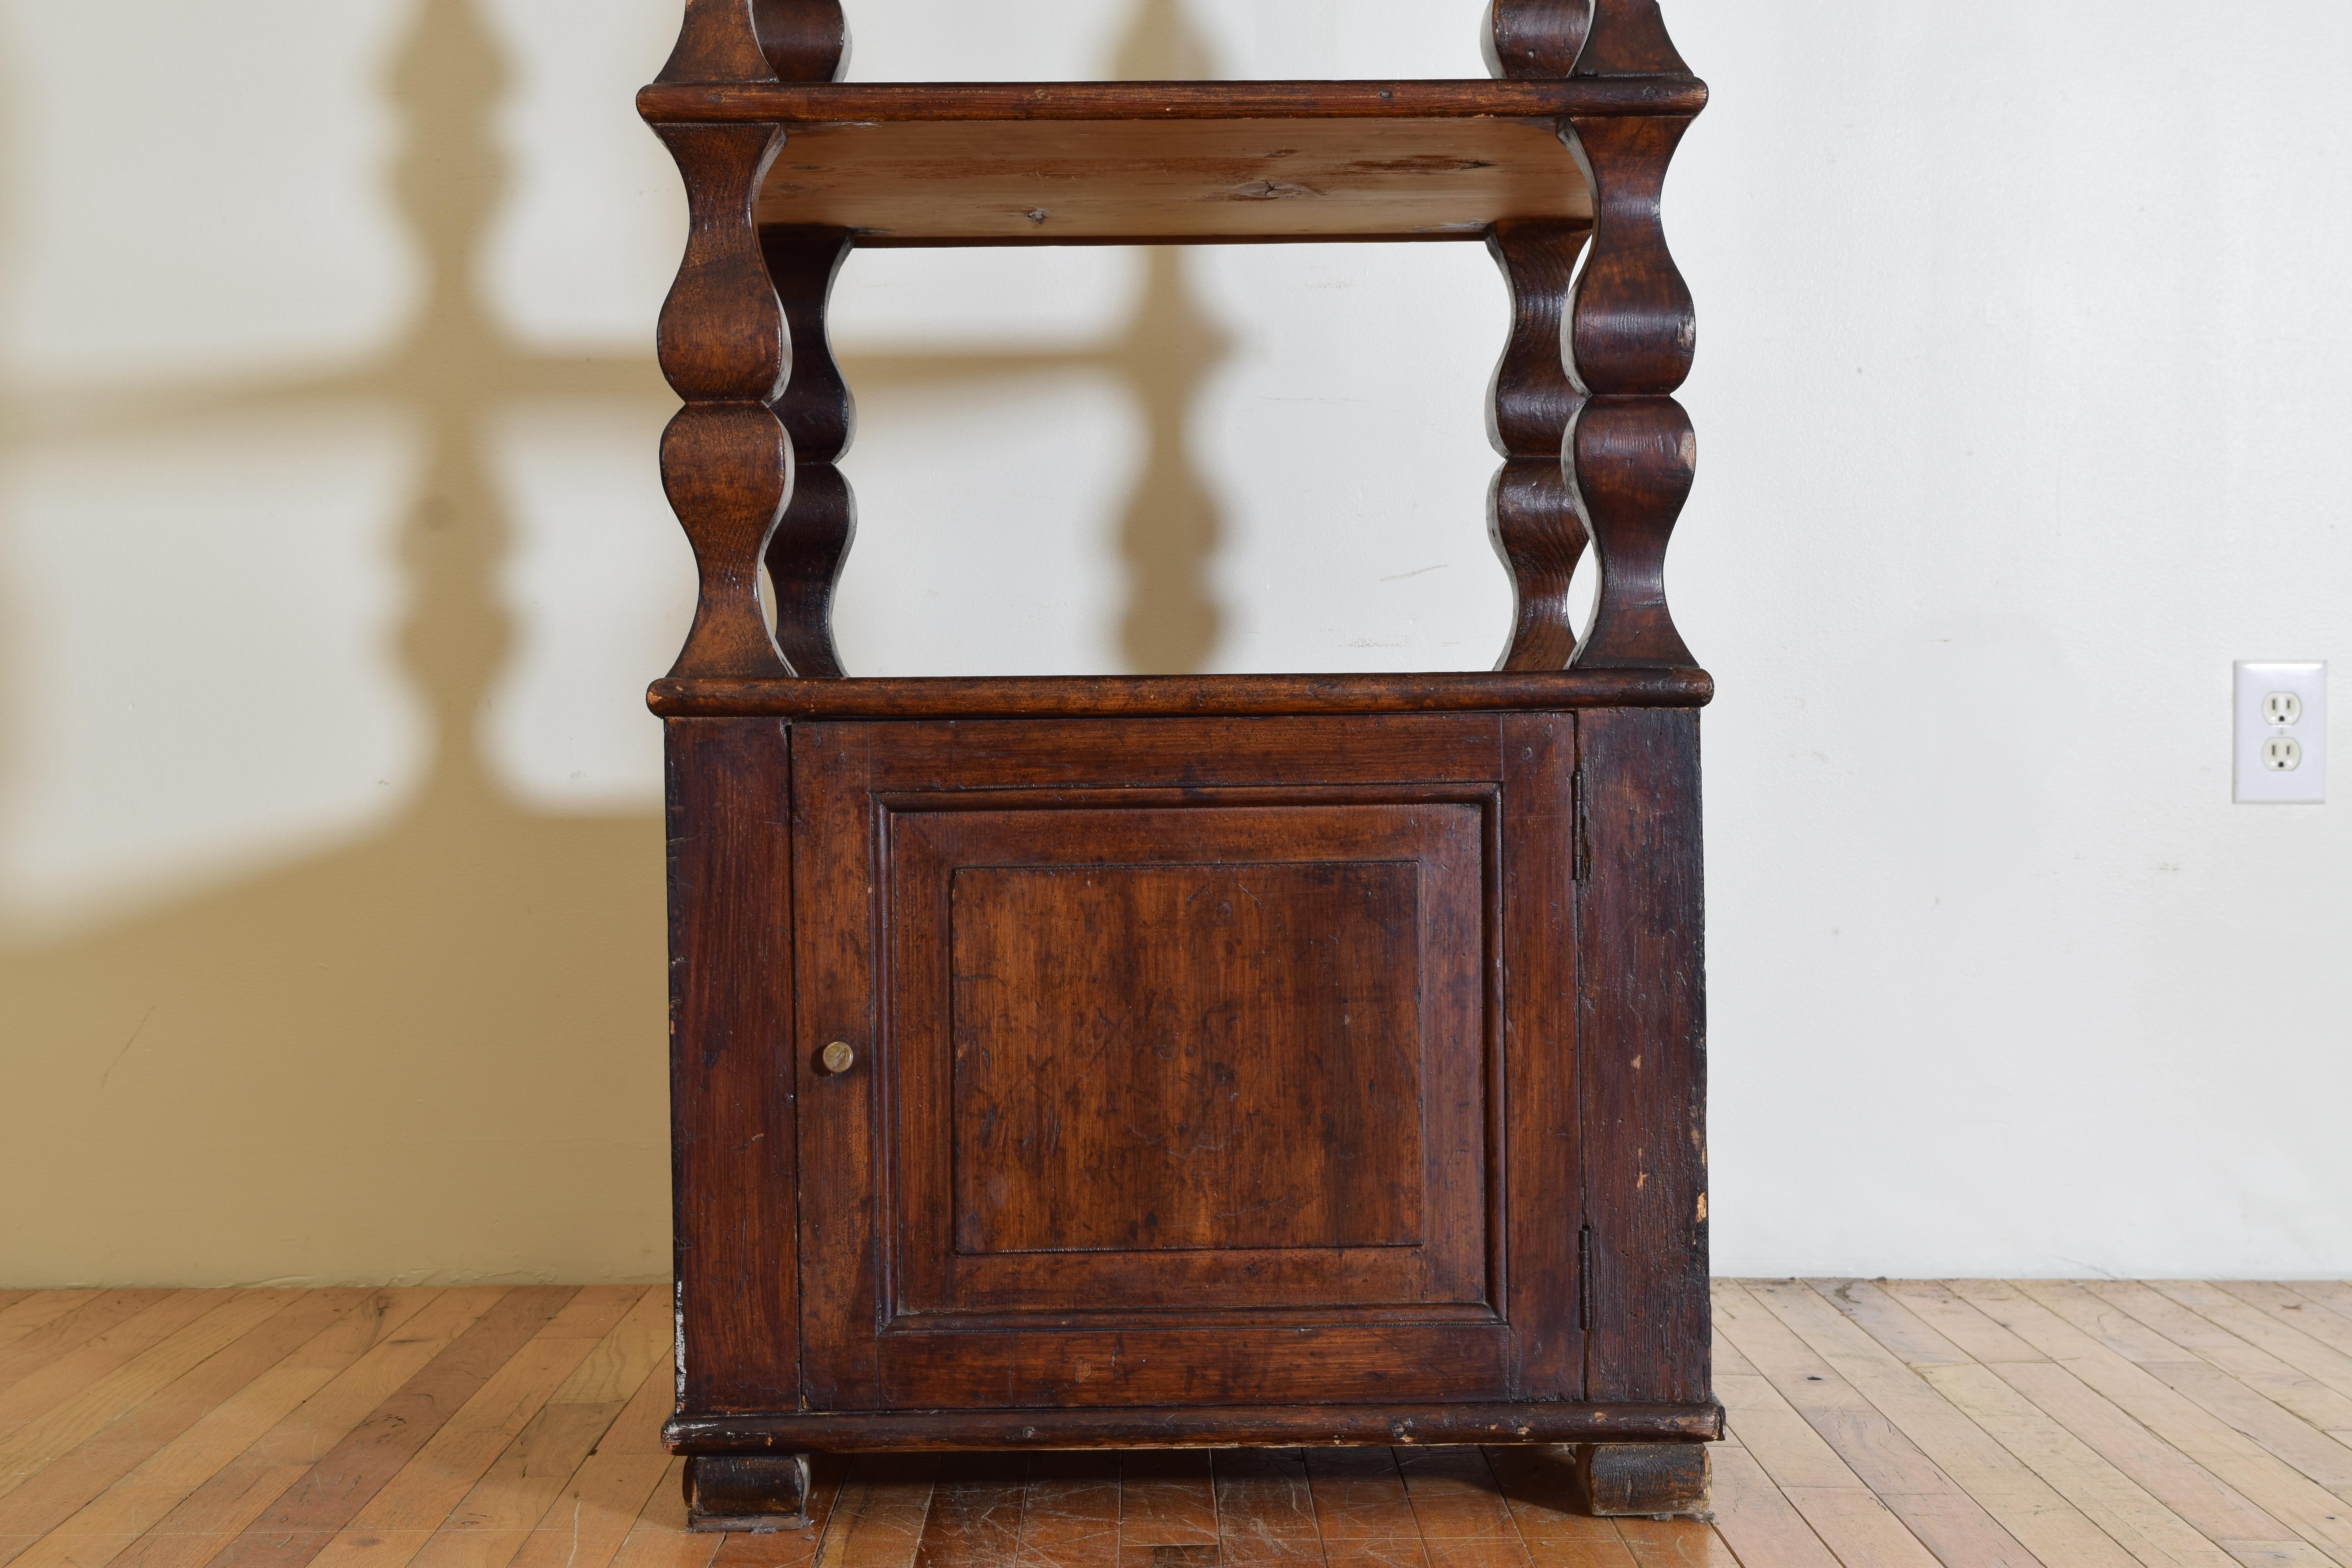 Southern Italian Abete (Fir) LXIV Style Etagere Cabinet, 3rd quarter 19th cen. For Sale 3